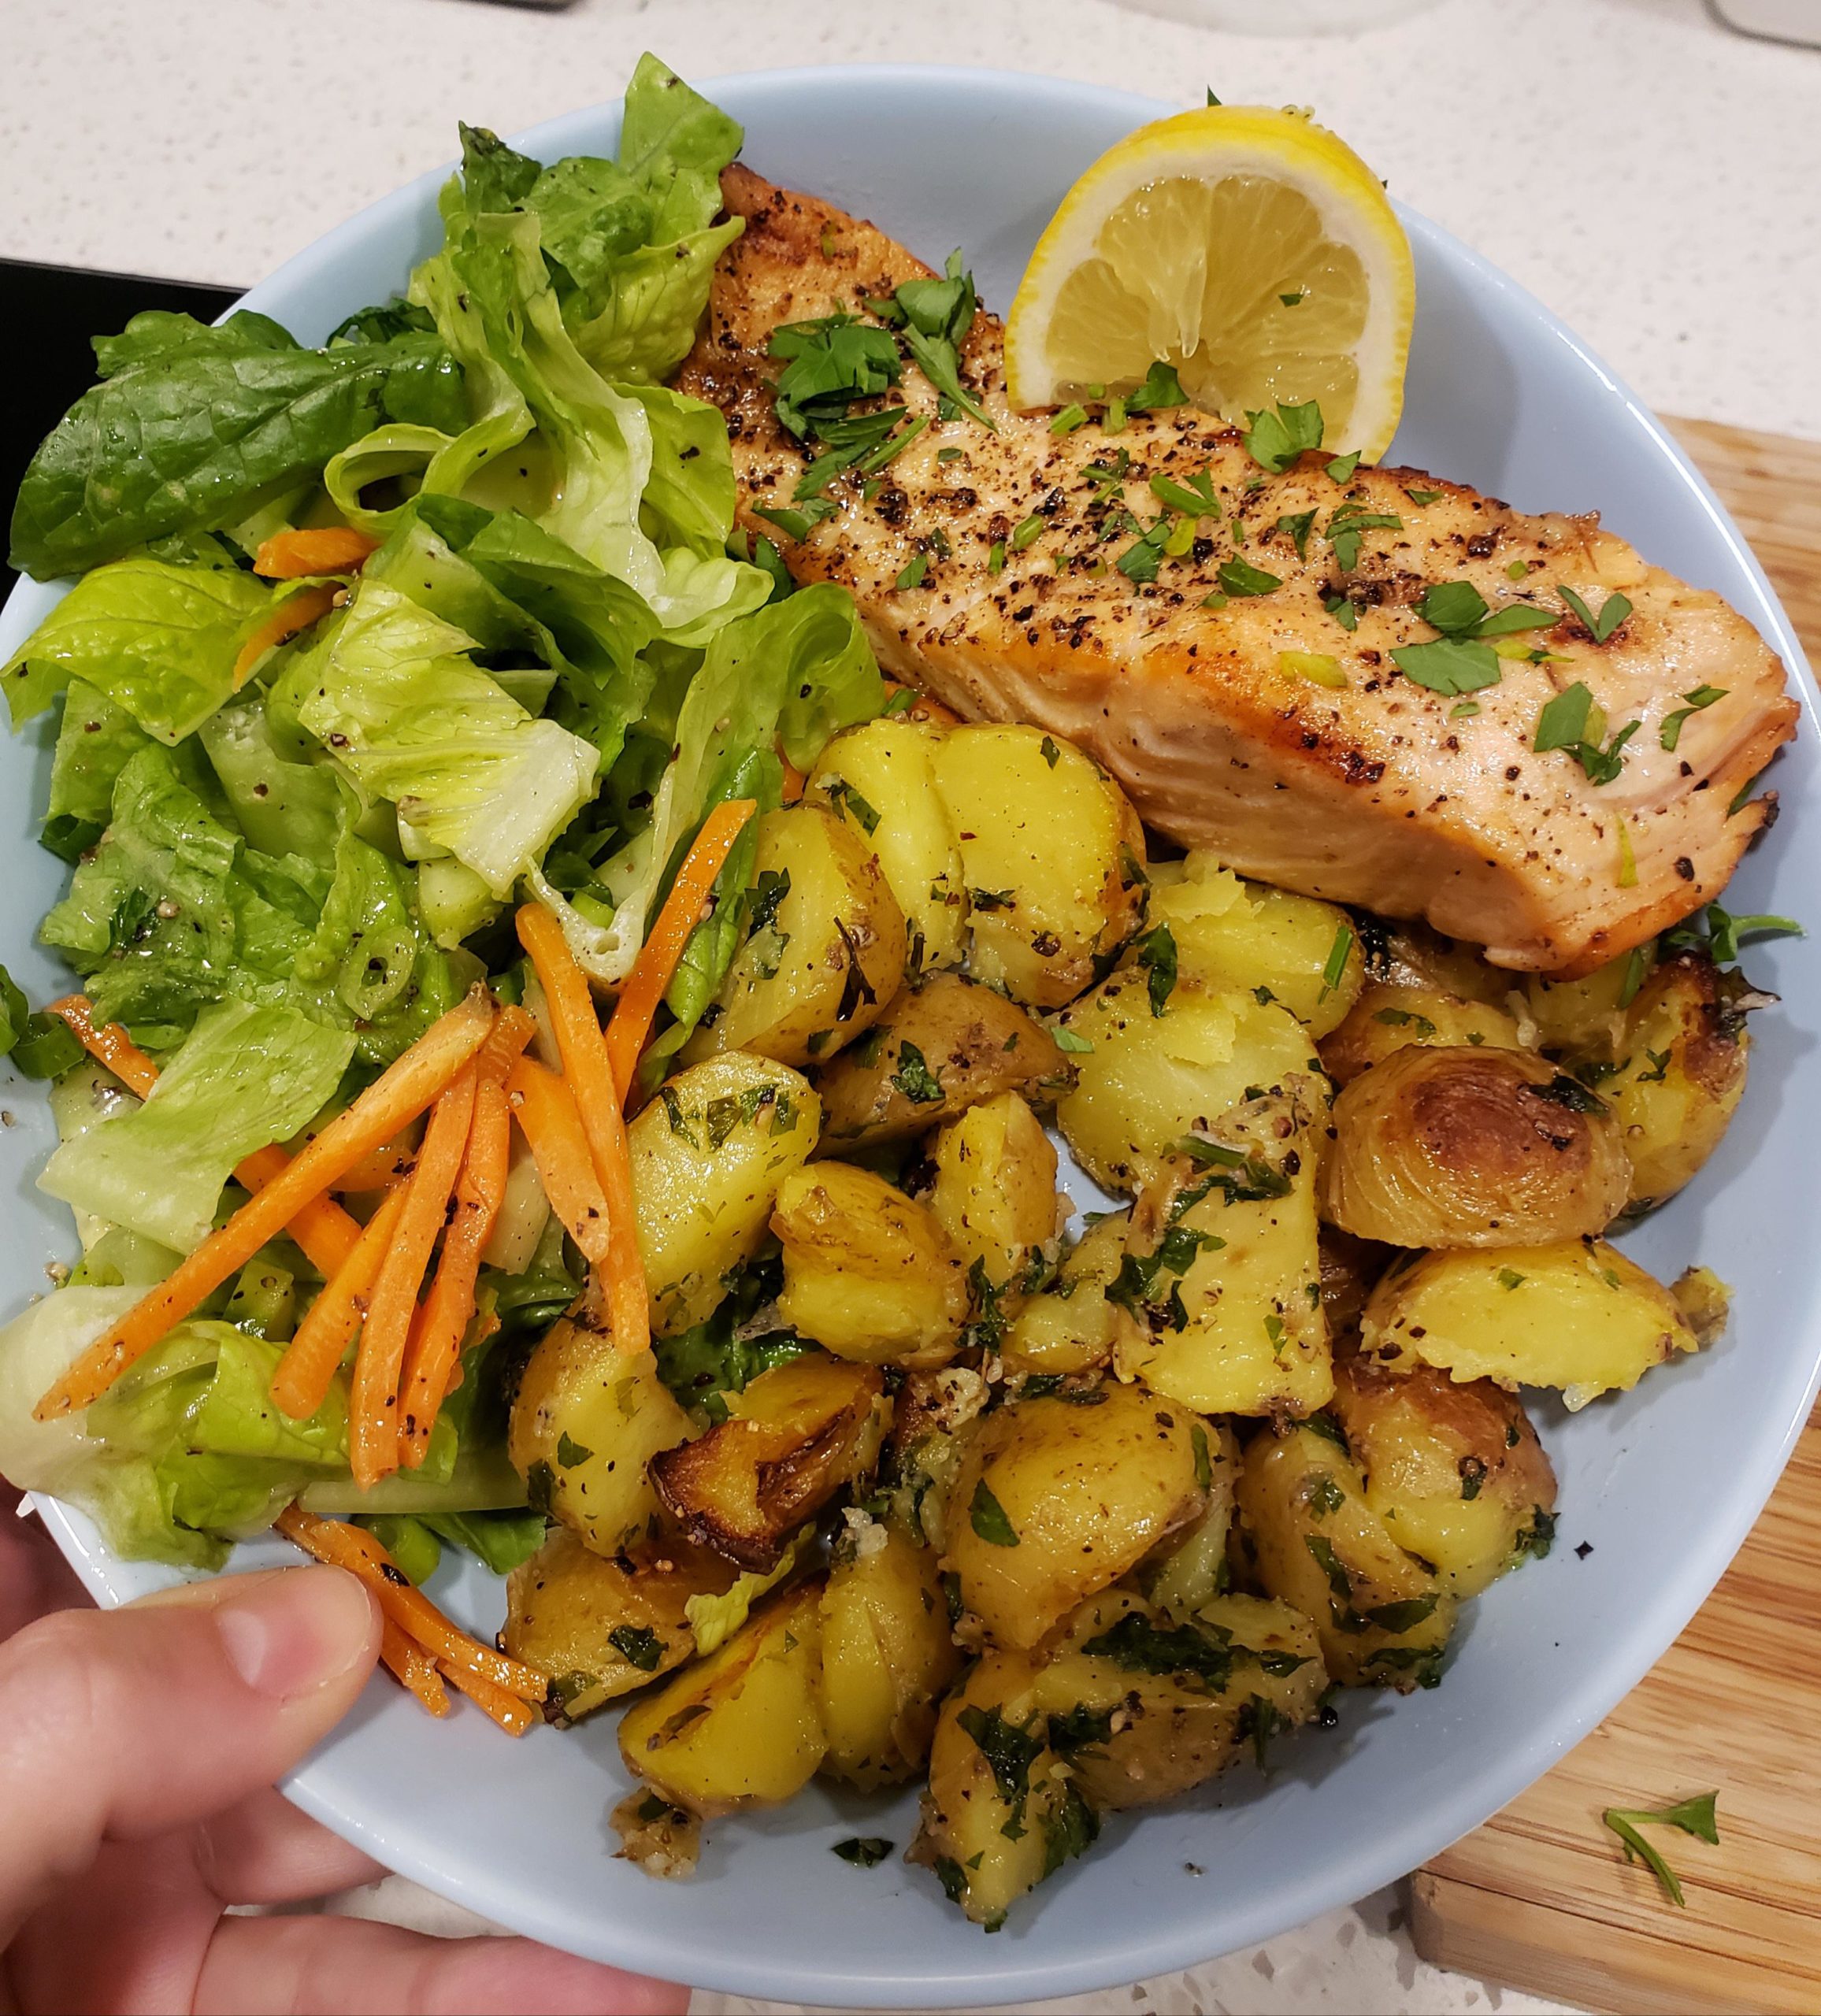 Grilled salmon, side salad with vinaigrette, and boiled-then-grilled ...